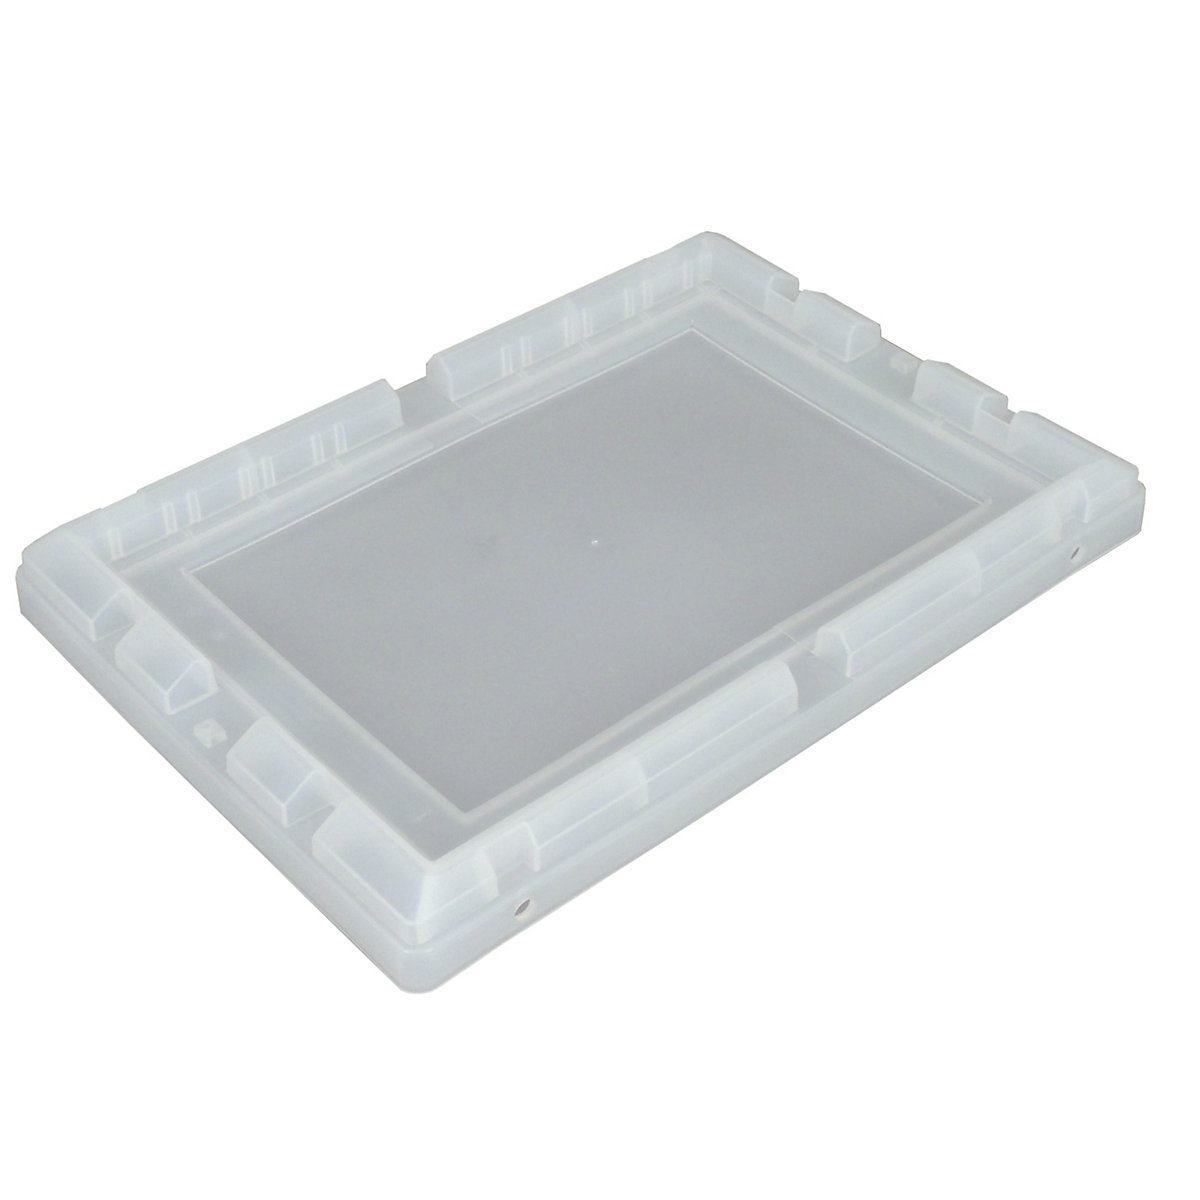 Container lid, polypropylene, WxLxH 330 x 480 x 46.5 mm, pack of 4, transparent-3